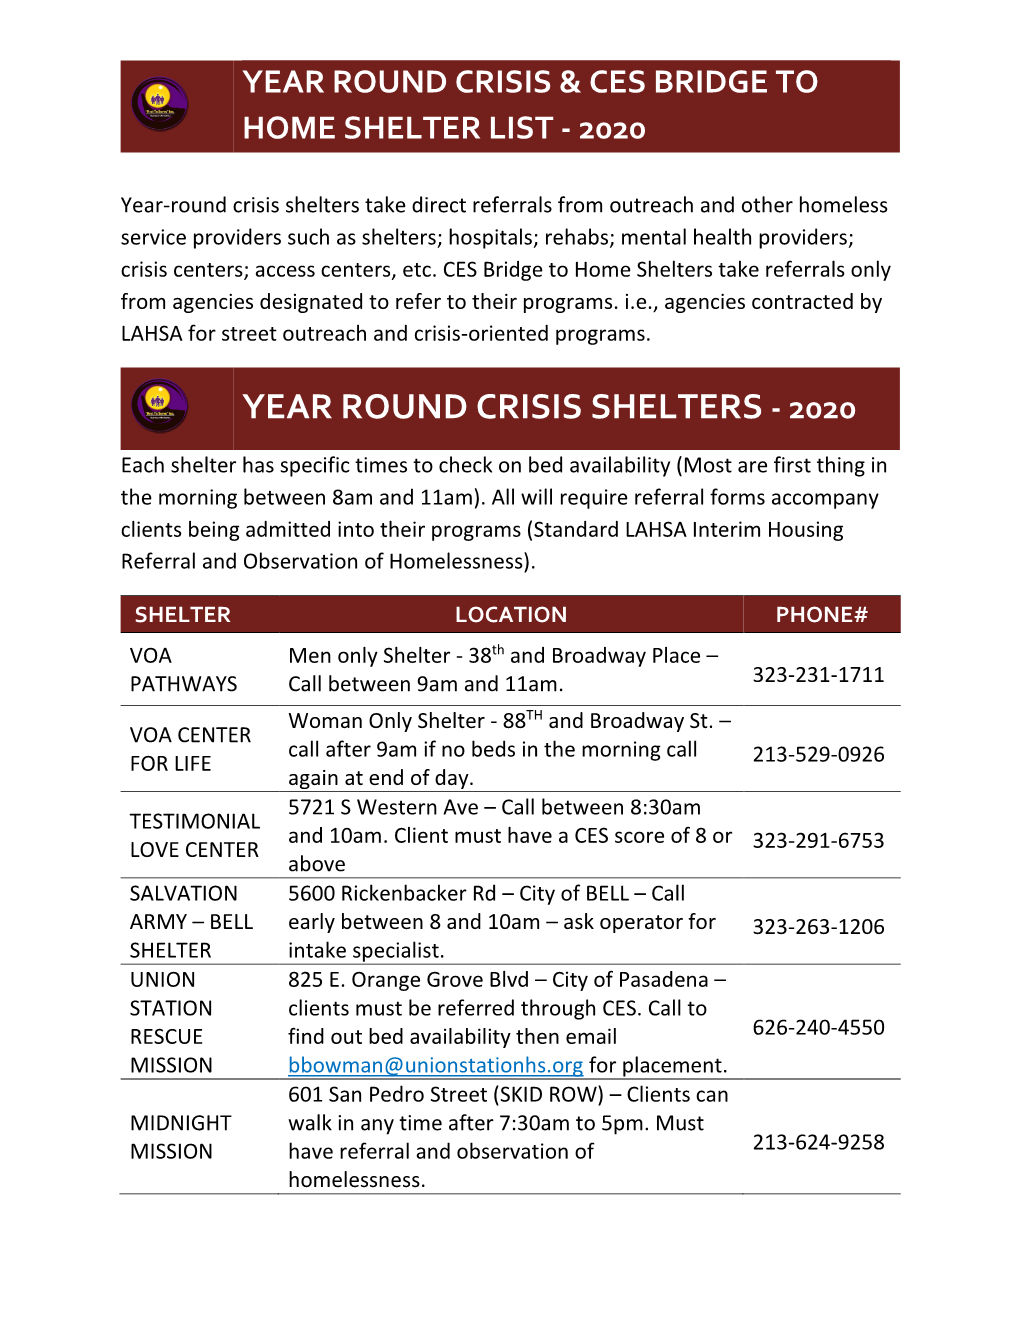 Year Round Crisis & Ces Bridge to Home Shelter List